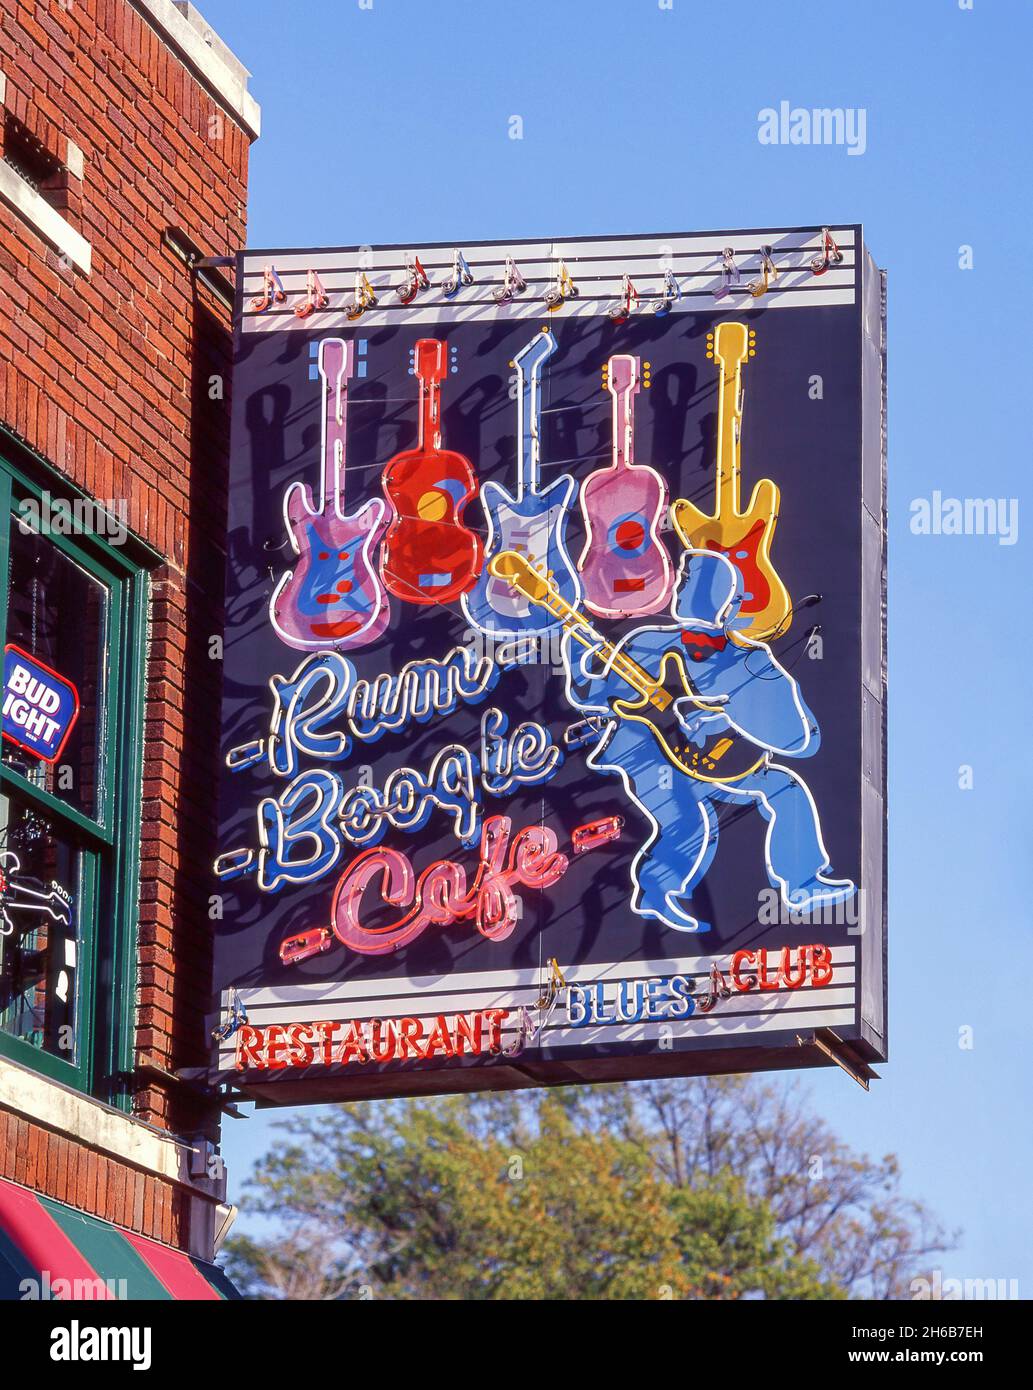 Rum Boogie Cafe sign, Beale Street, Beale Street District, Memphis, Tennessee, United States of America Stock Photo